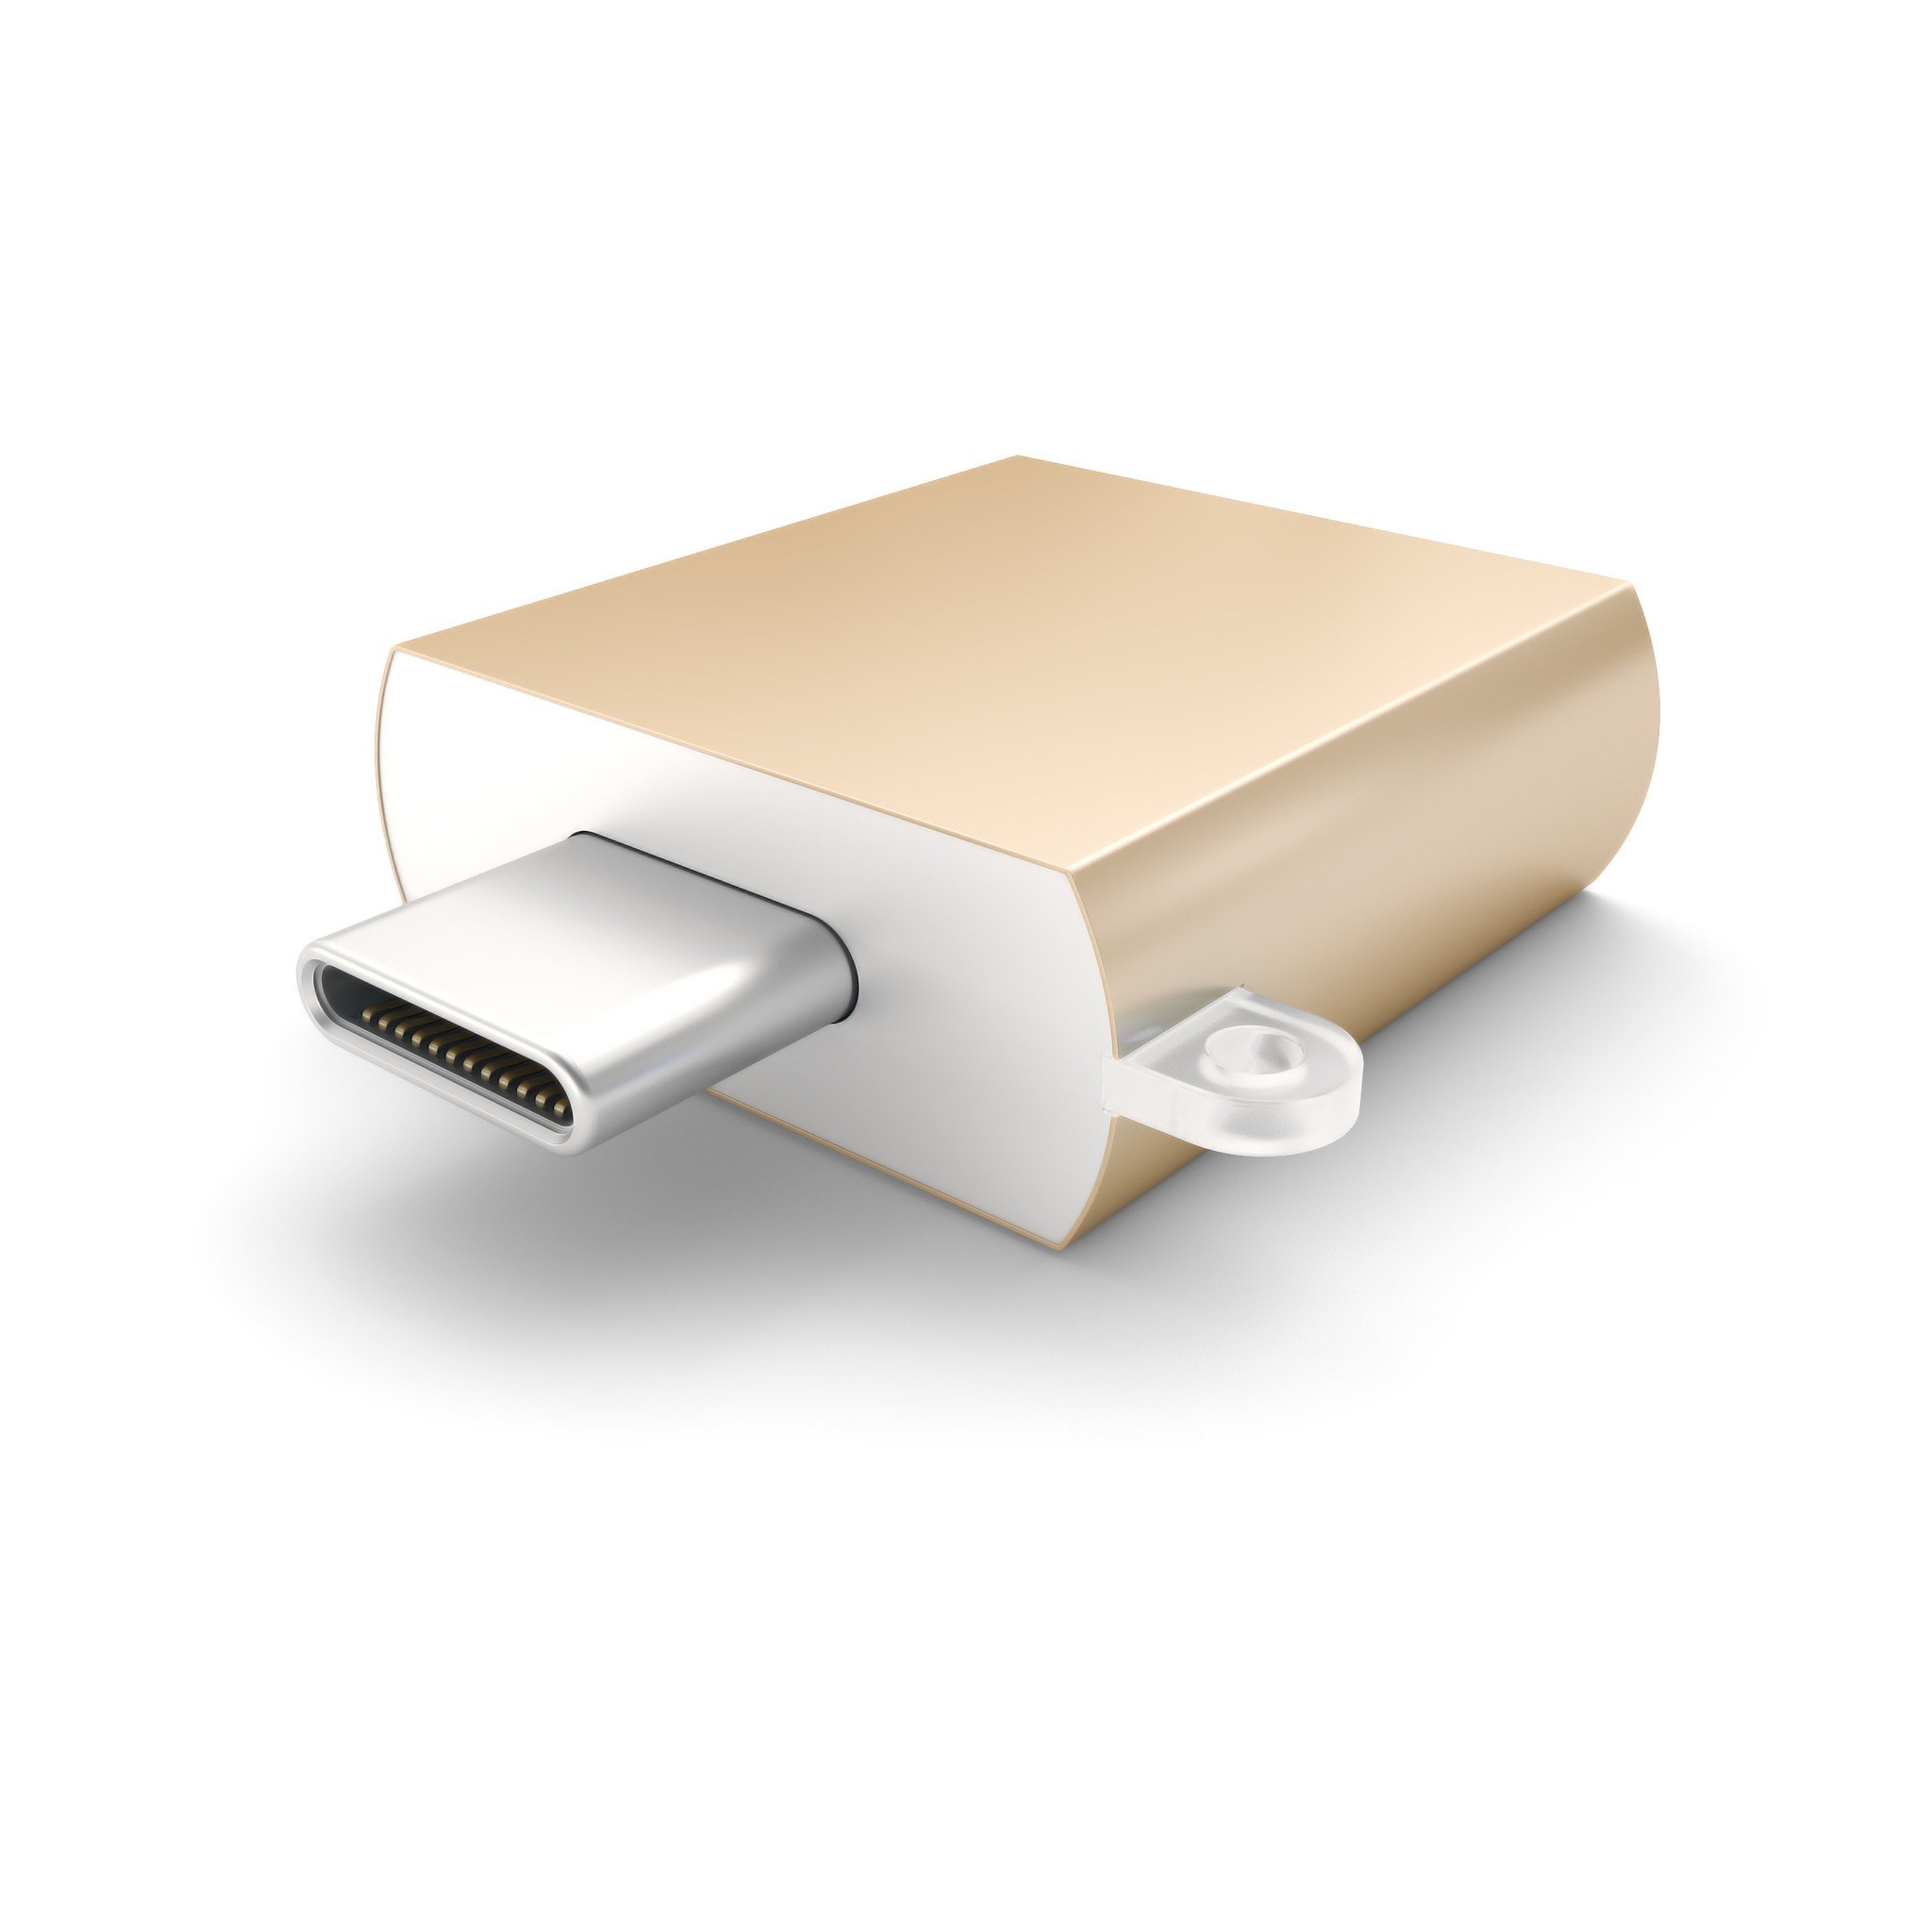 Satechi Type-C USB Adapter Gold (ST-TCUAG)